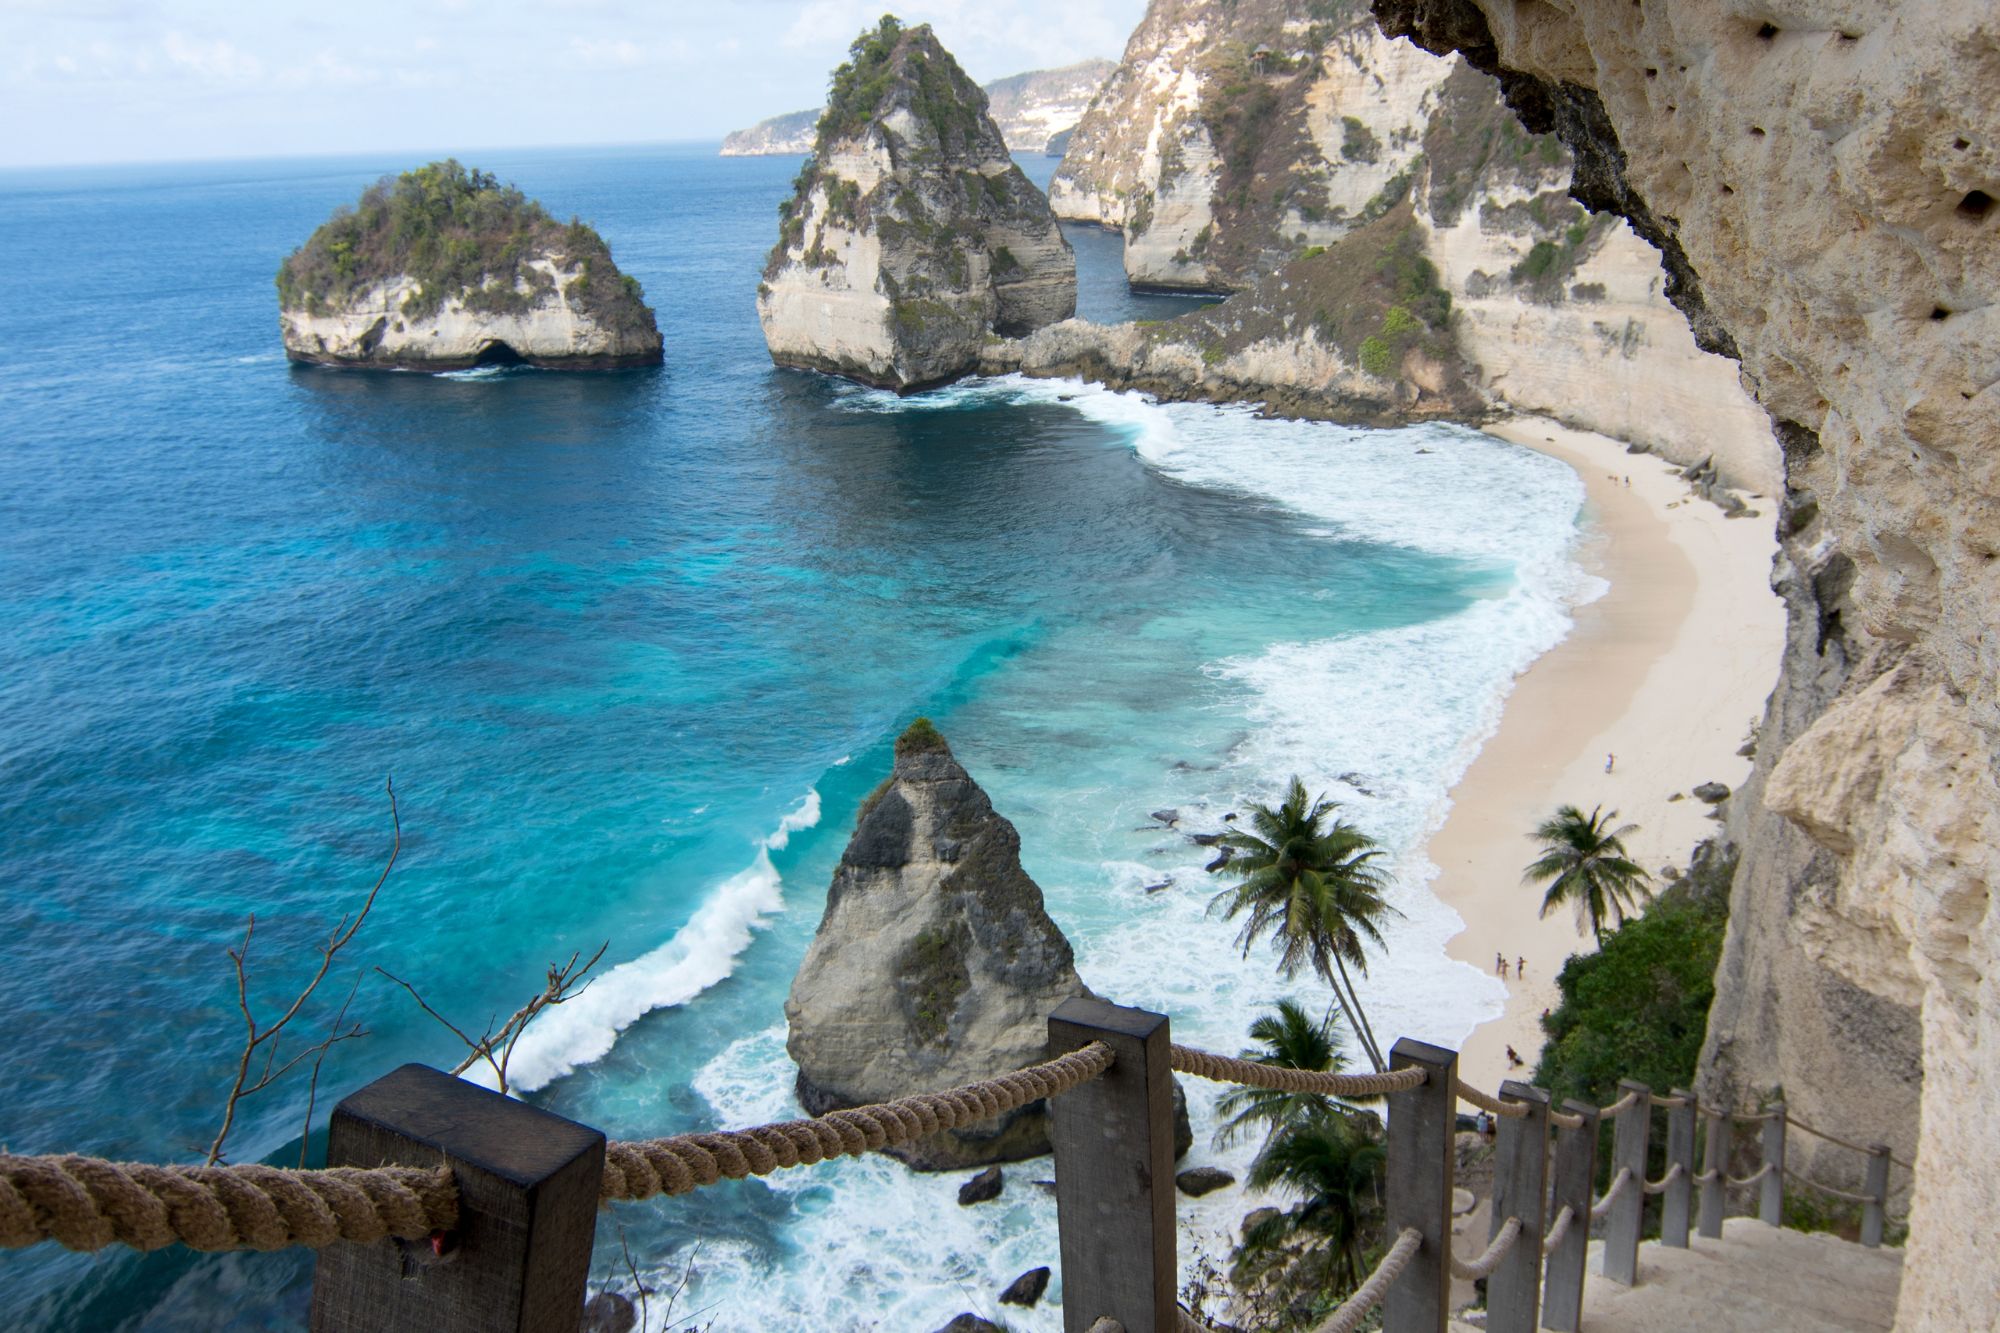 Have you been to Nusa Penida yet?